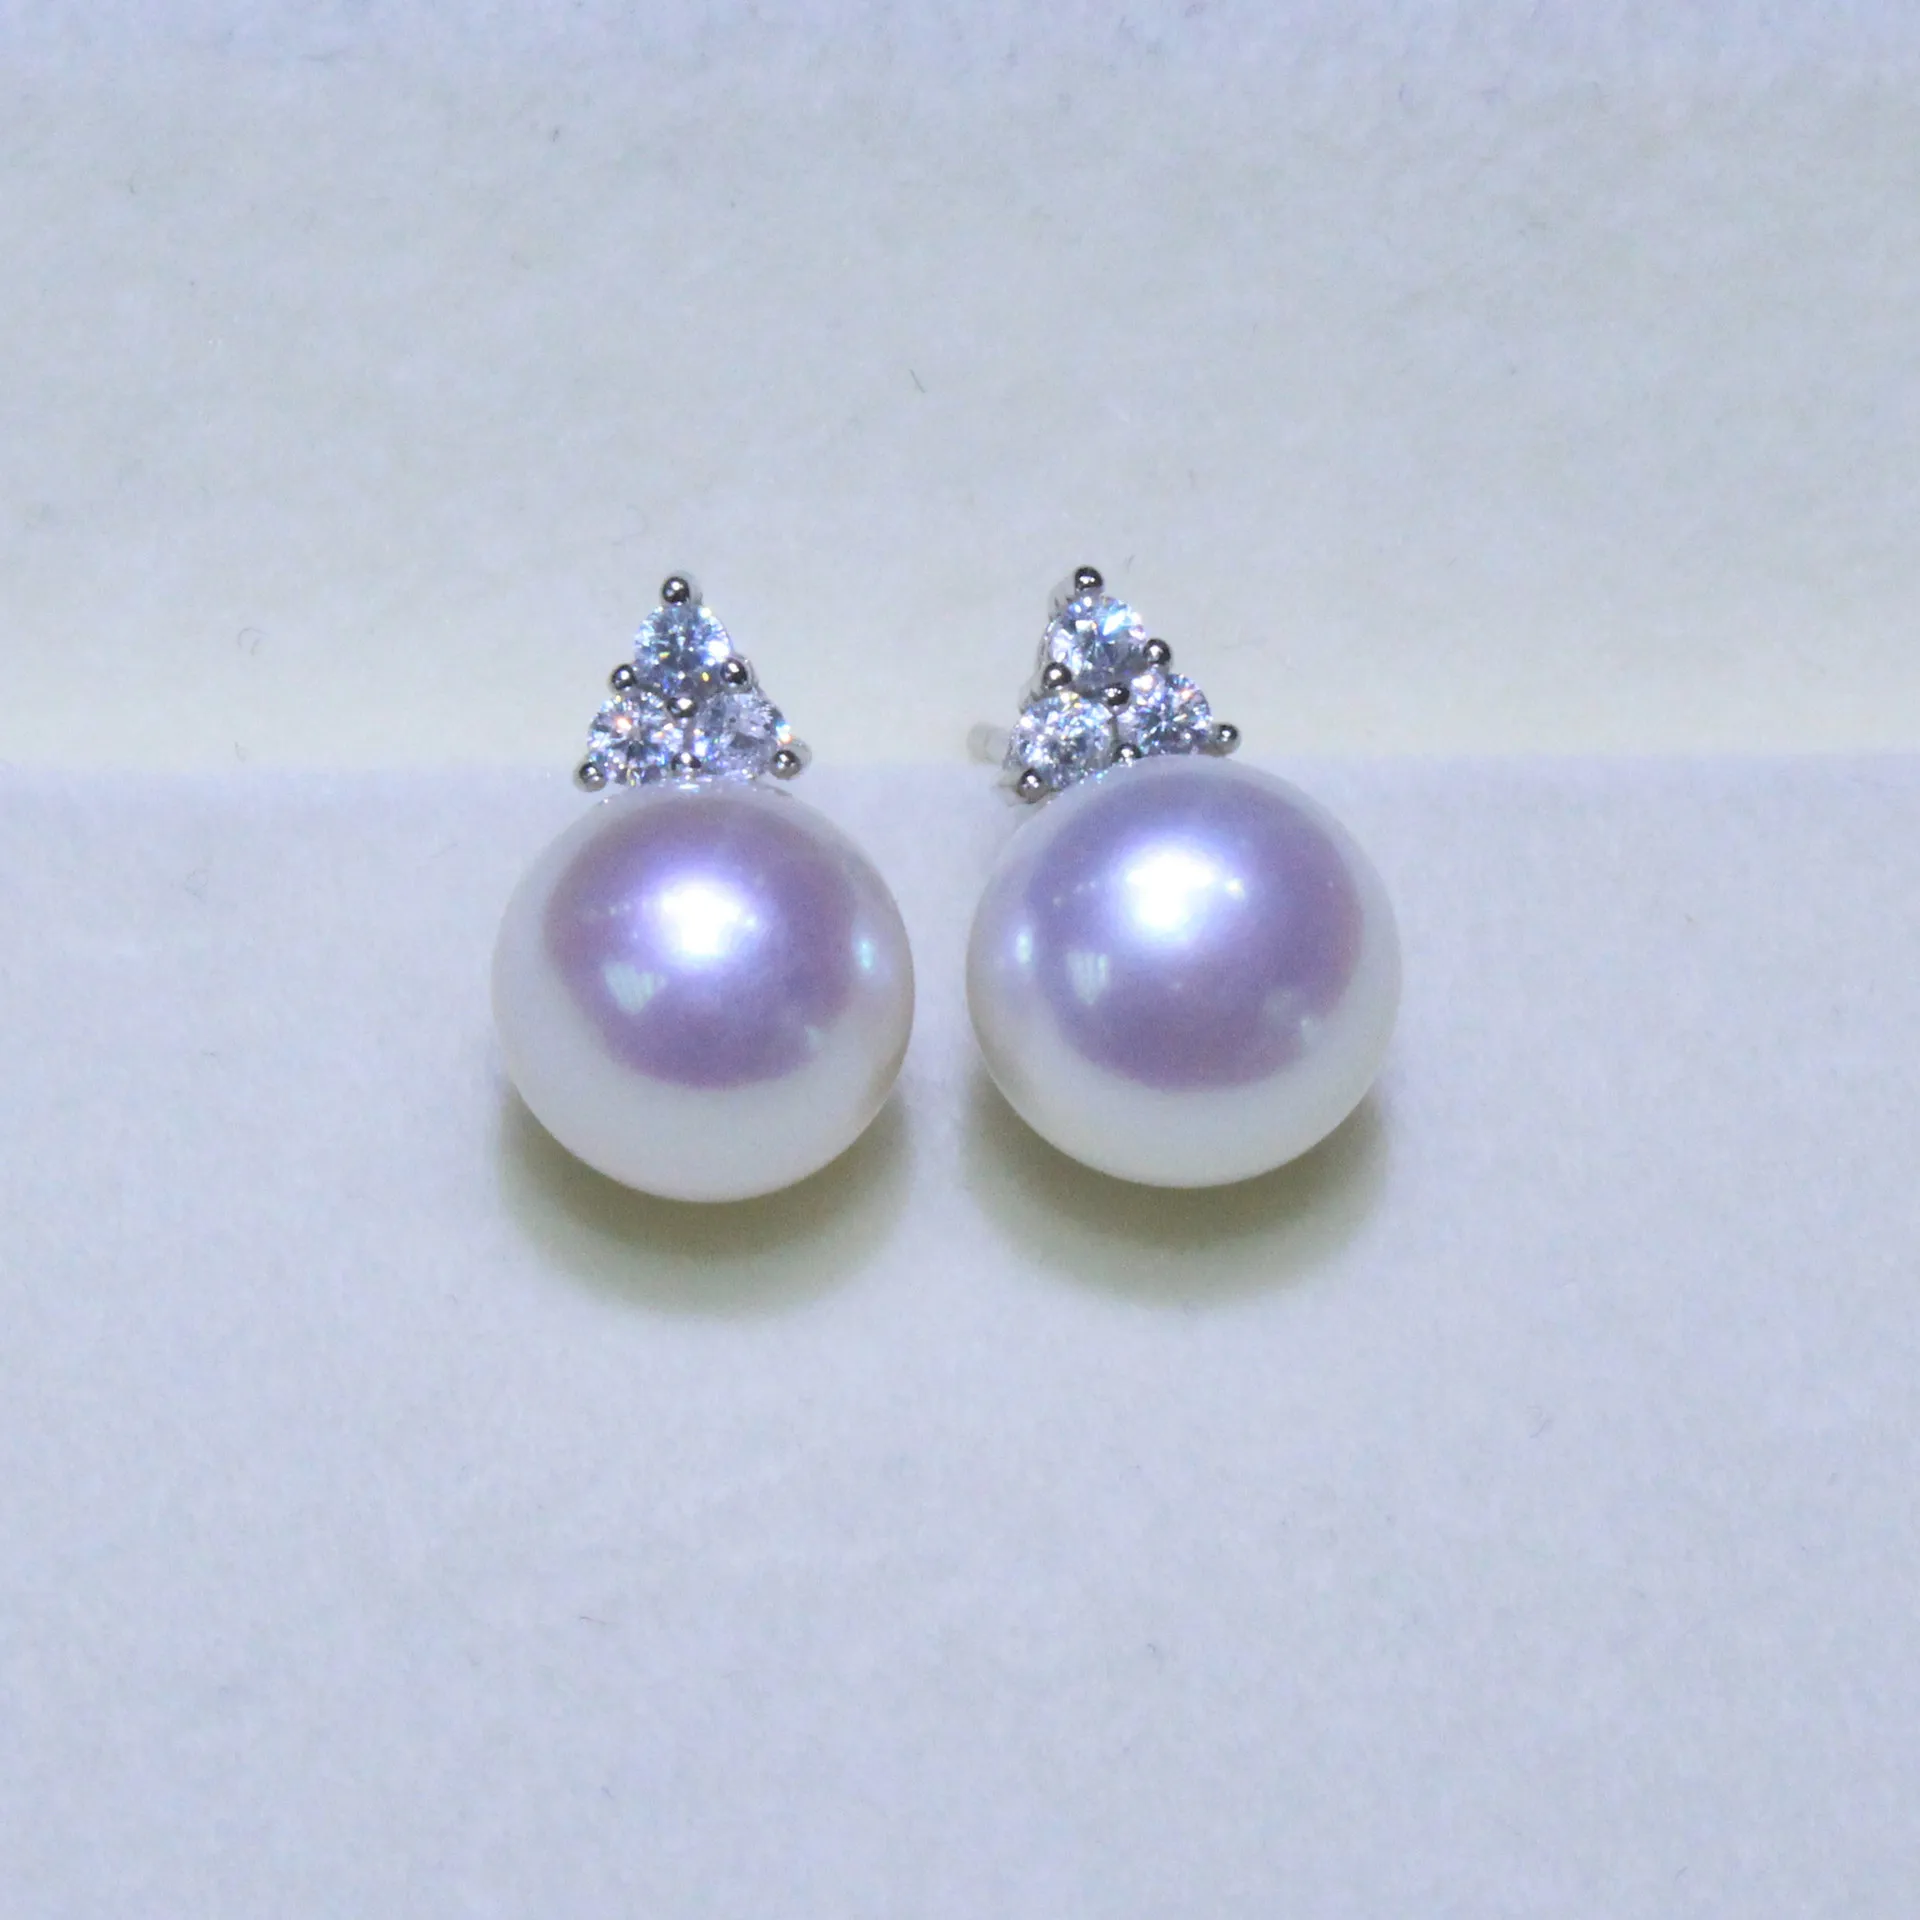 

Certified Natural Freshwater Pearl Ear Studs White Pink Glossy 5A Grade Strong Light Flawless Pearl Earrings S925 Silver